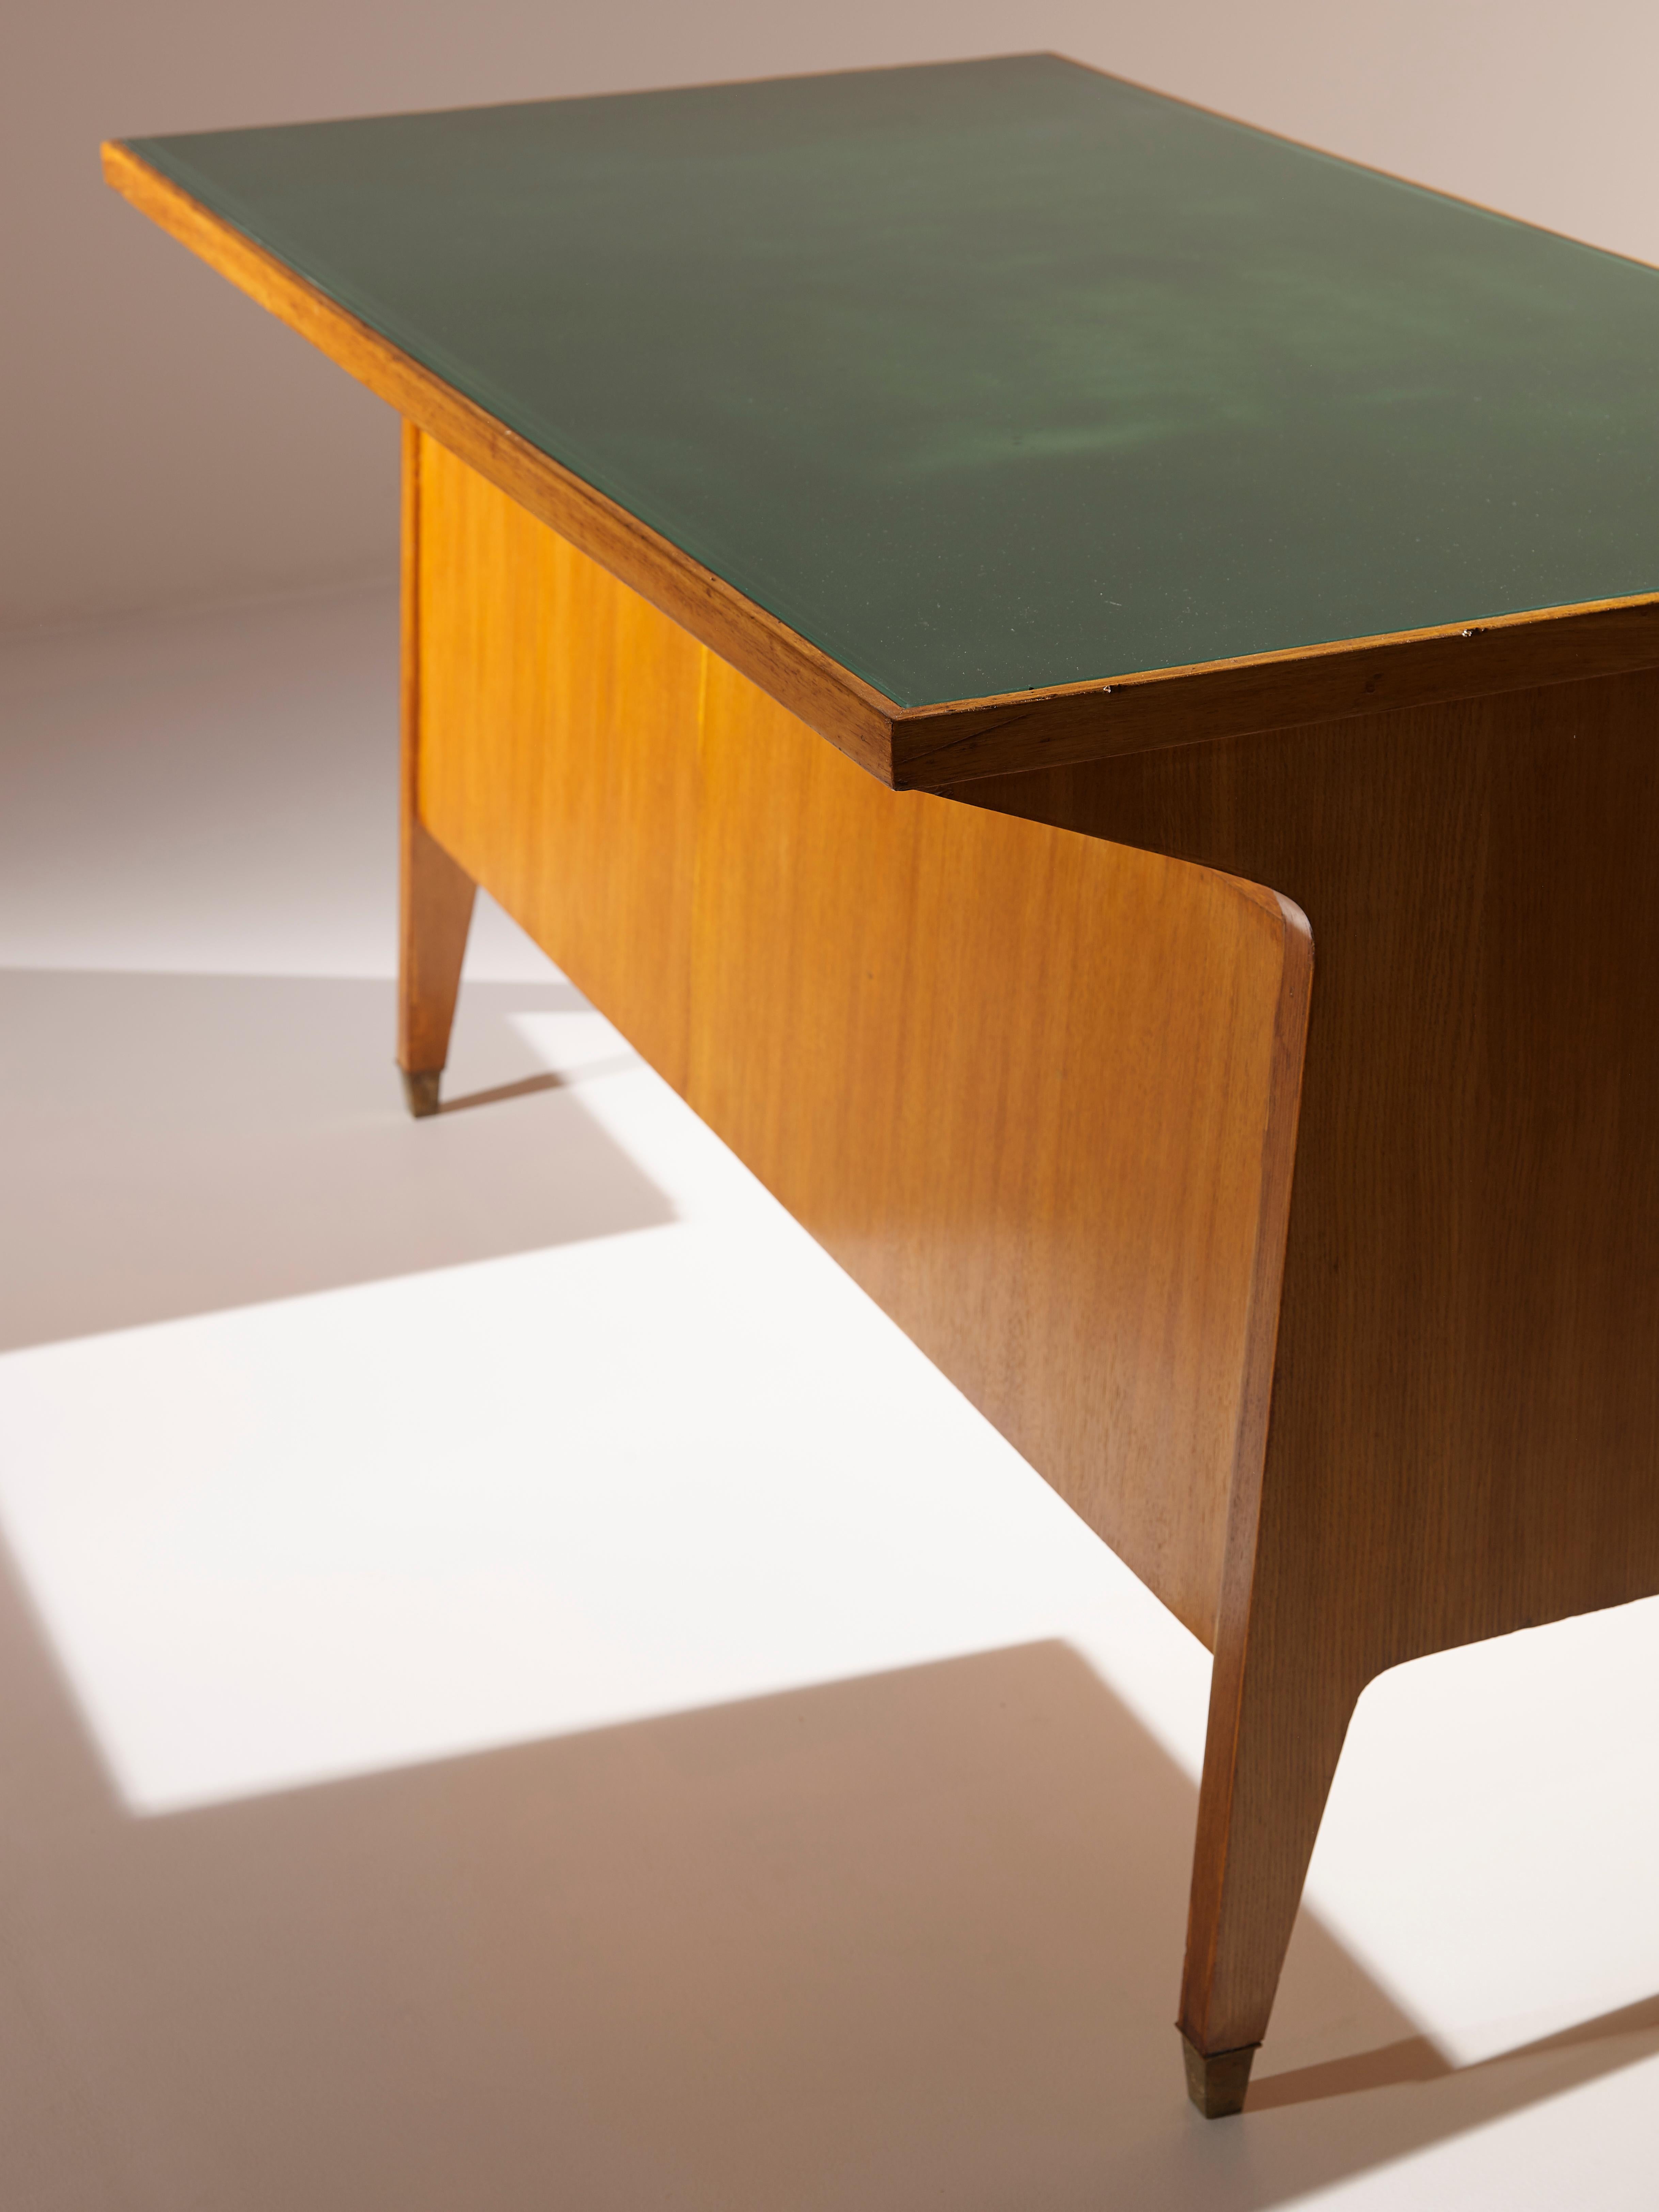 Italian Mid-Century Oak Desk Gio Ponti Inspired, with Brass Feet and Glass Top 6